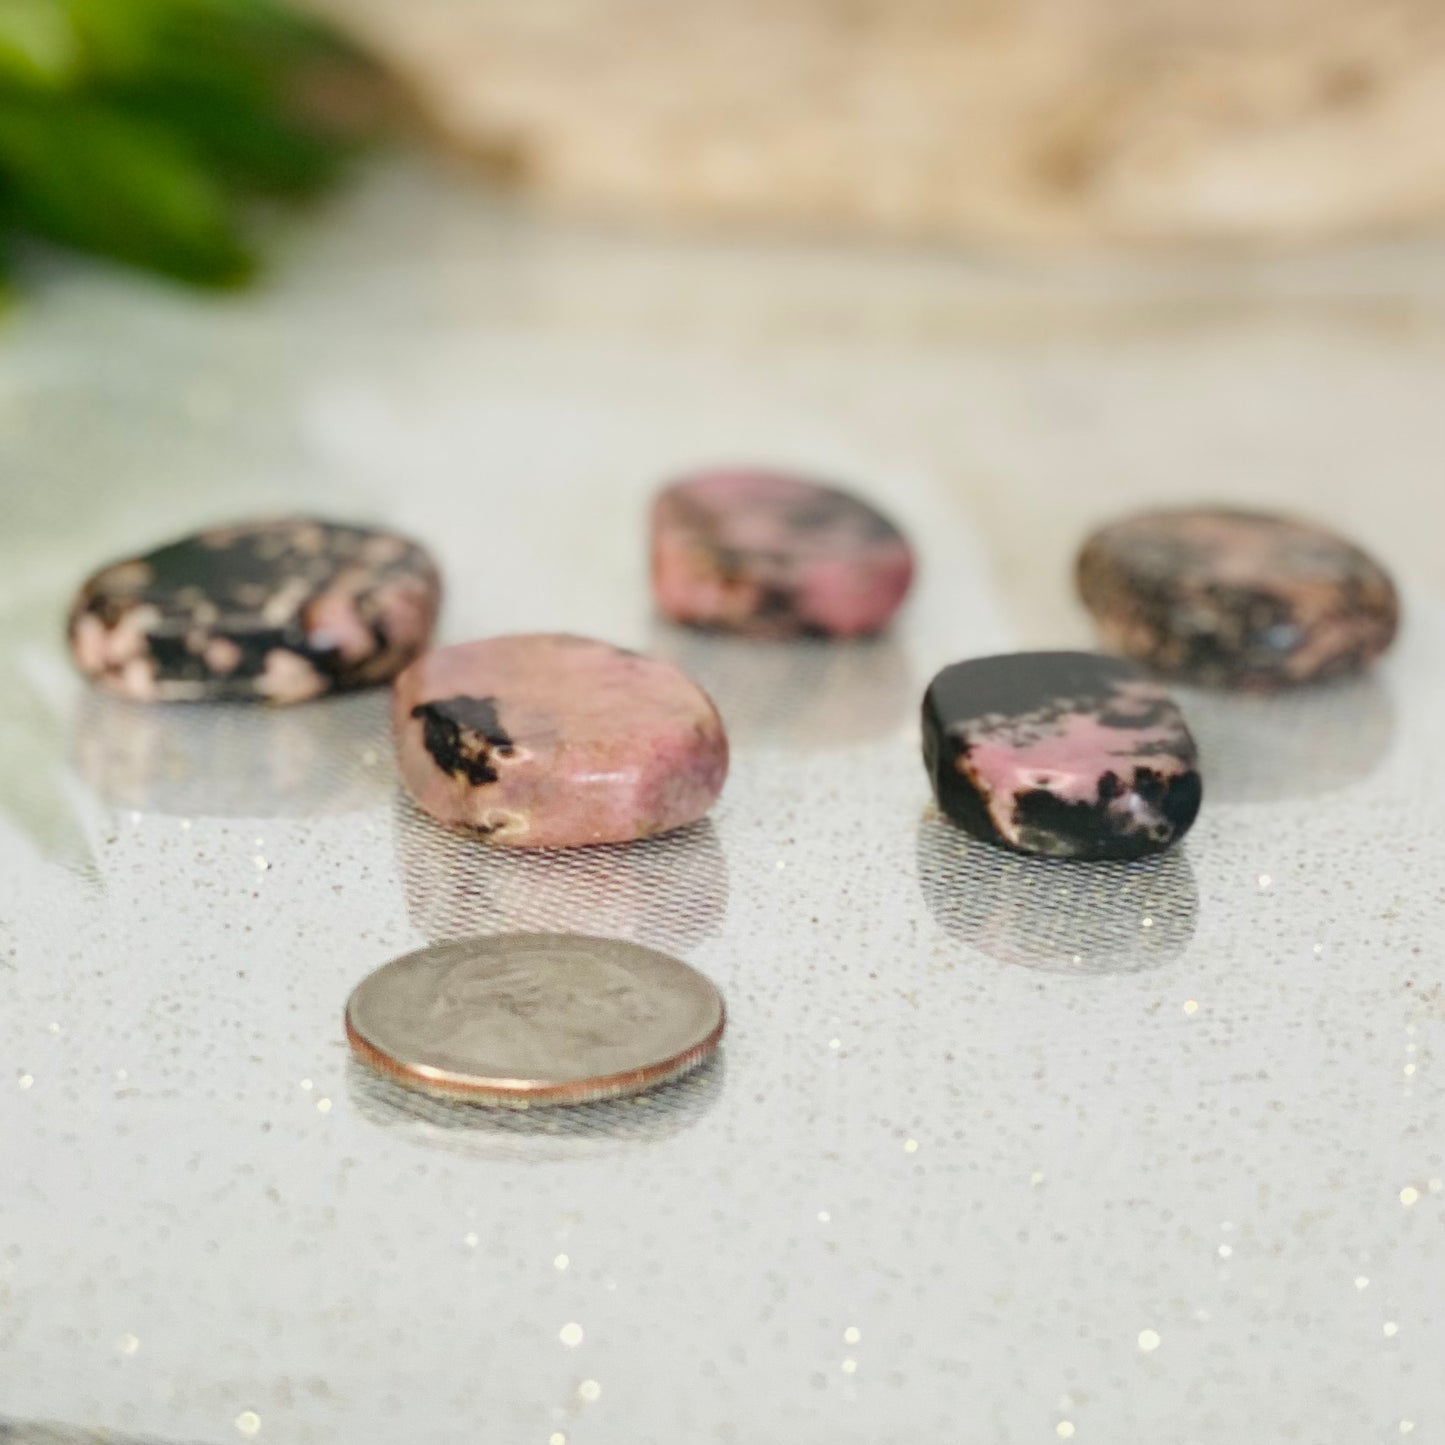 Rhodonite Soothing Stones: Embrace Compassion and Tranquility